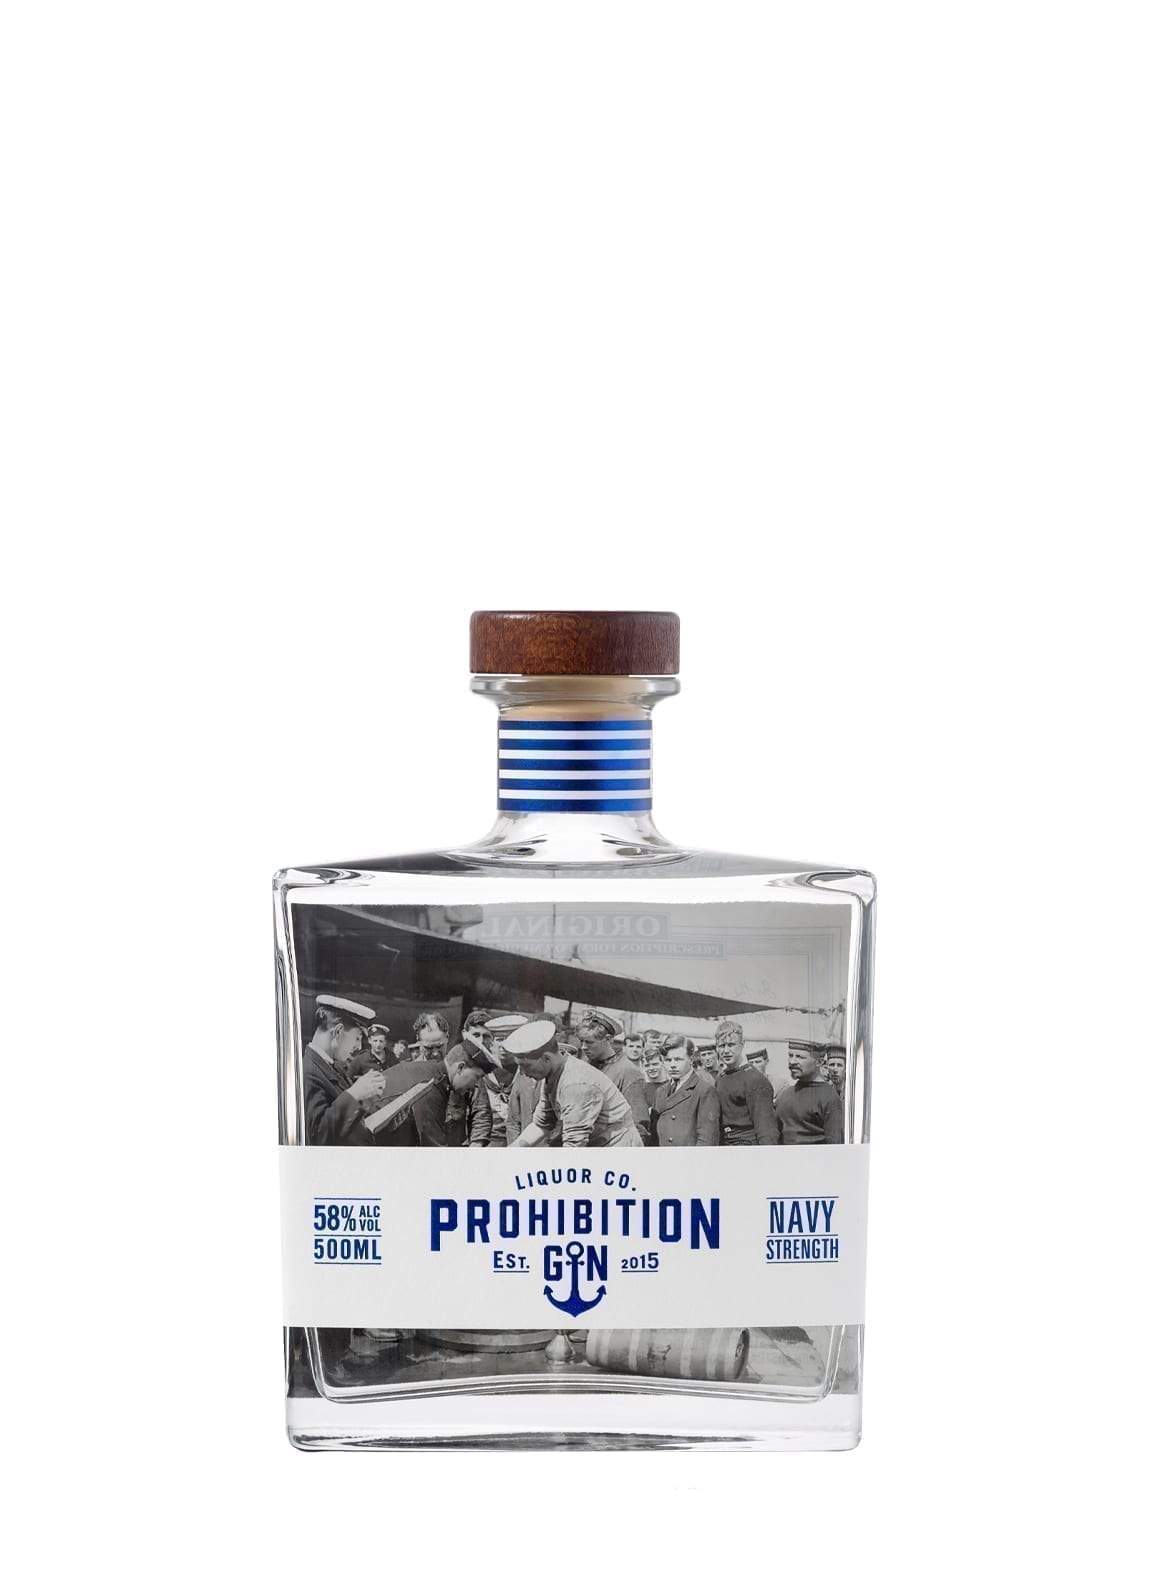 Prohibition Navy Strength Gin 58% 100ml | Gin | Shop online at Spirits of France